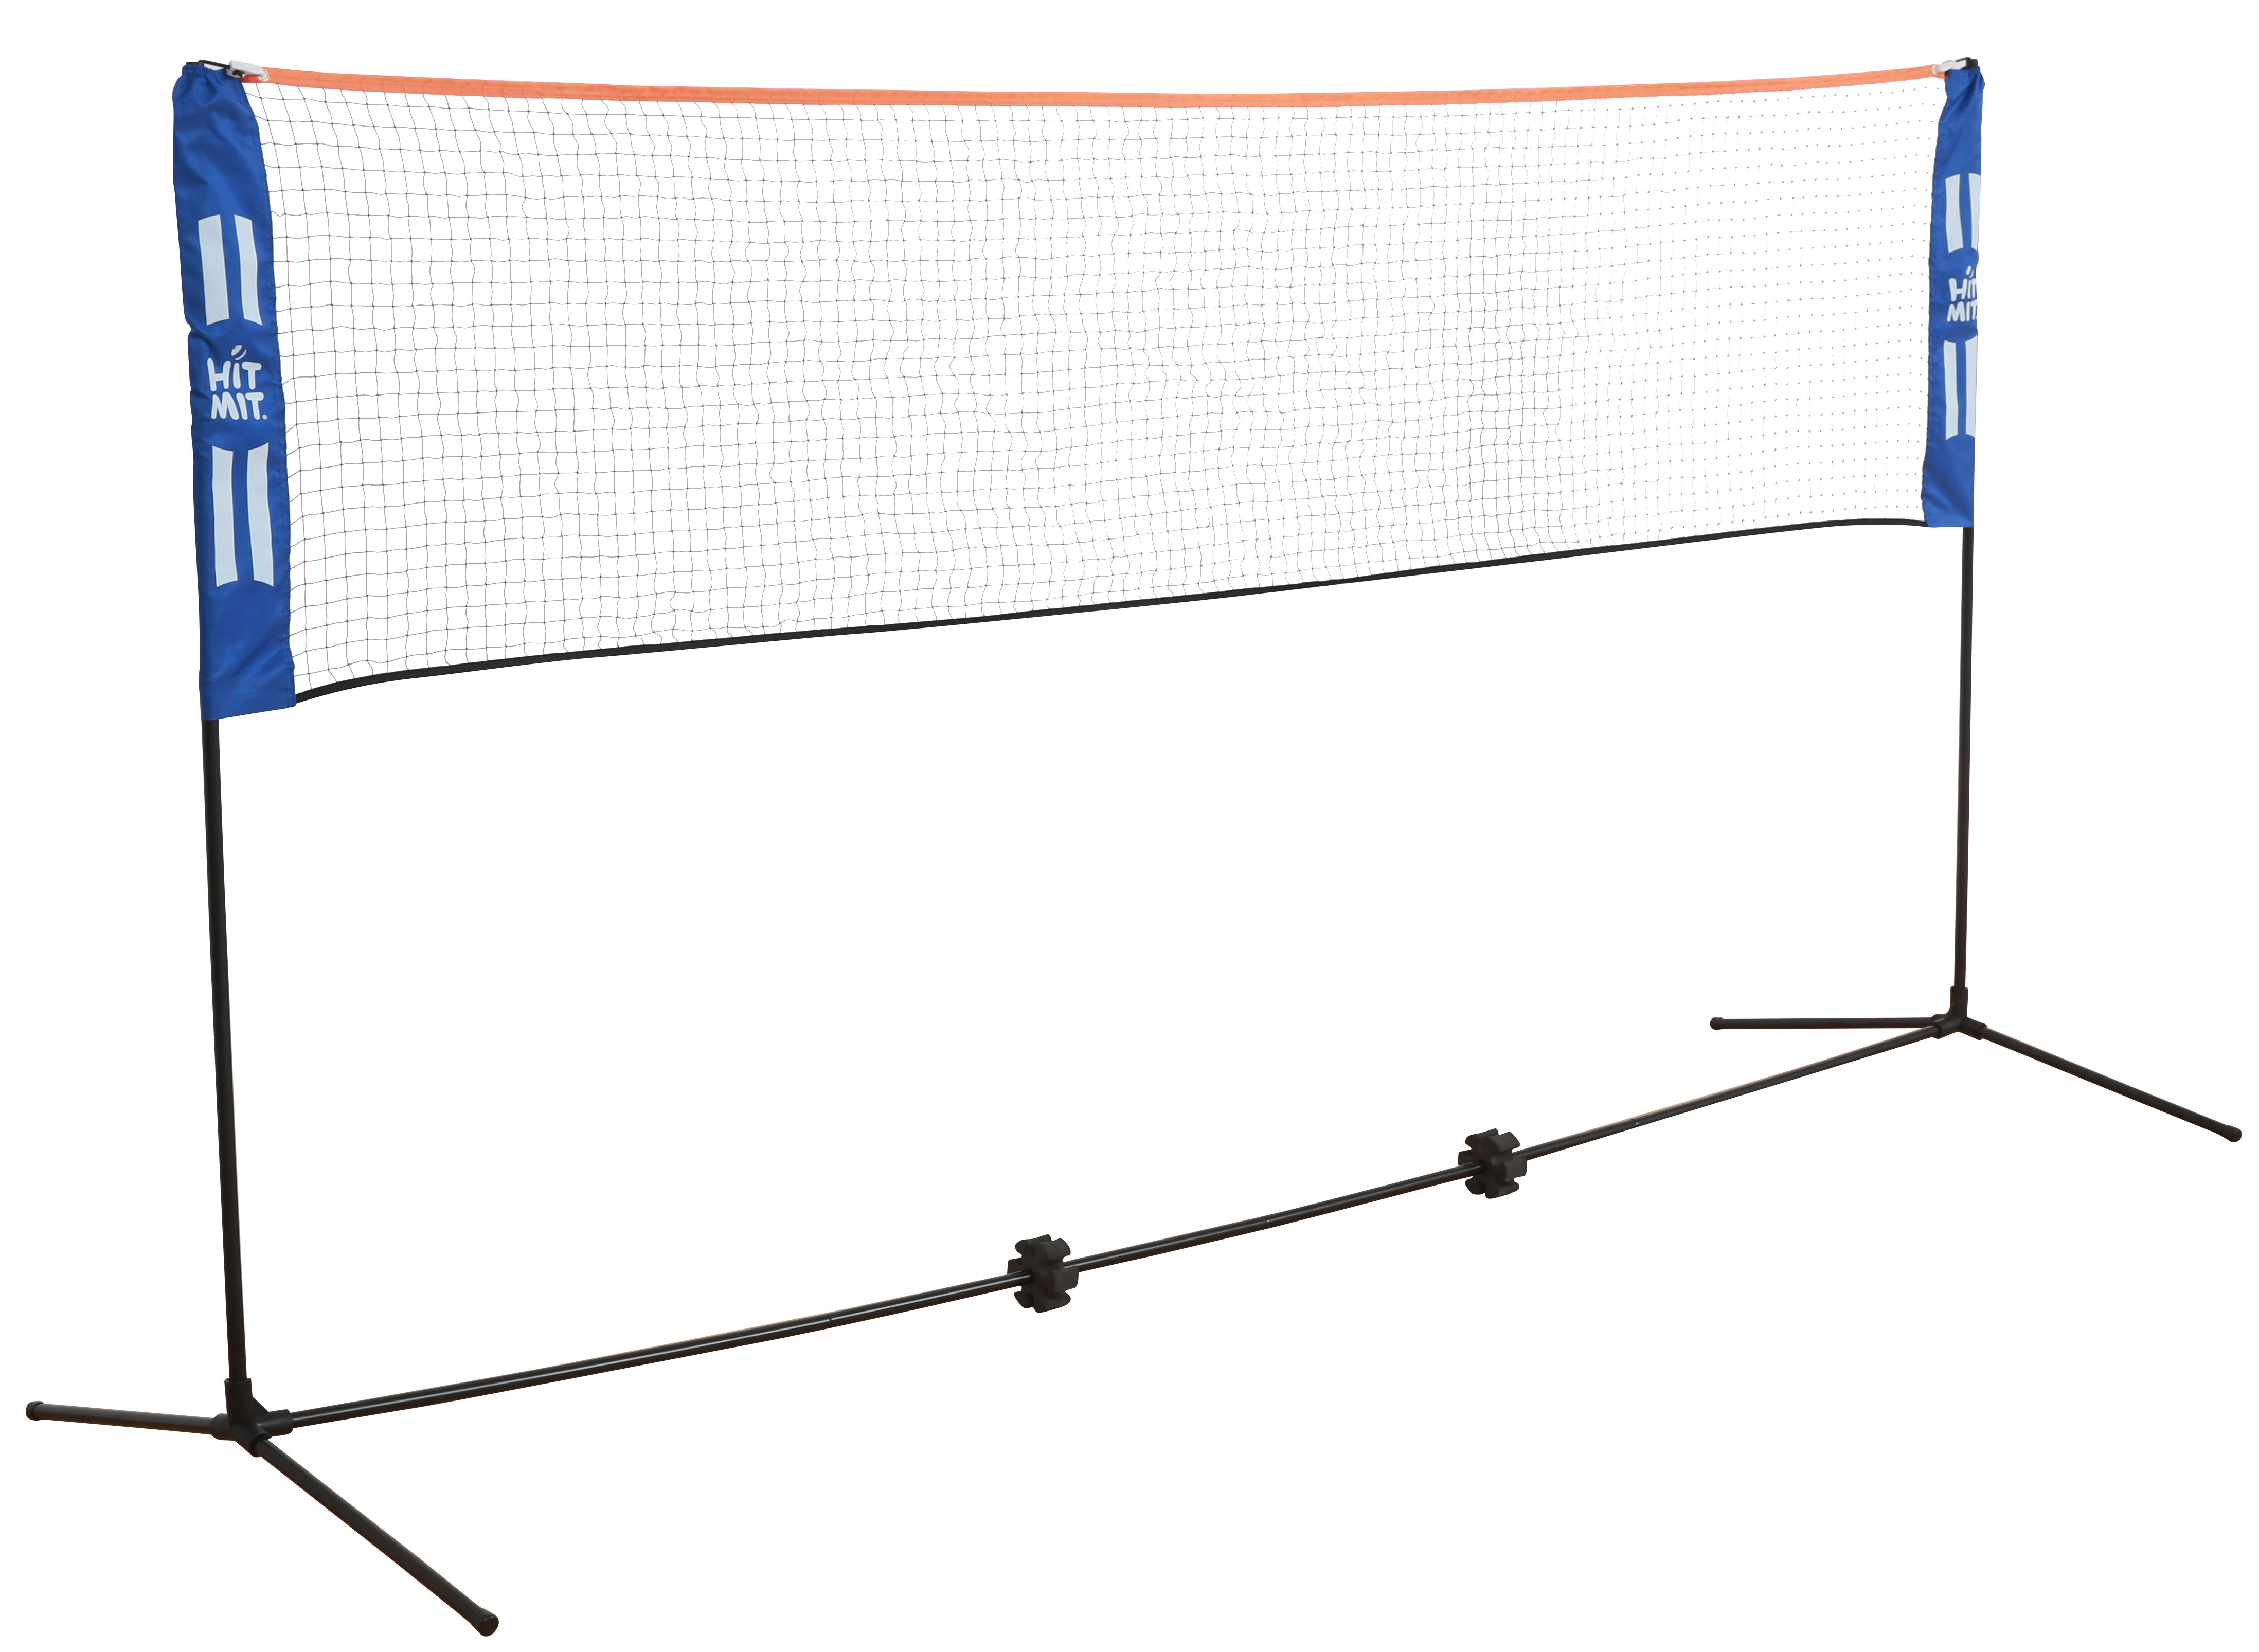 Details about   Badminton Net Indoor Outdoor Volleyball Training Portable Tennis Sport Accessory 